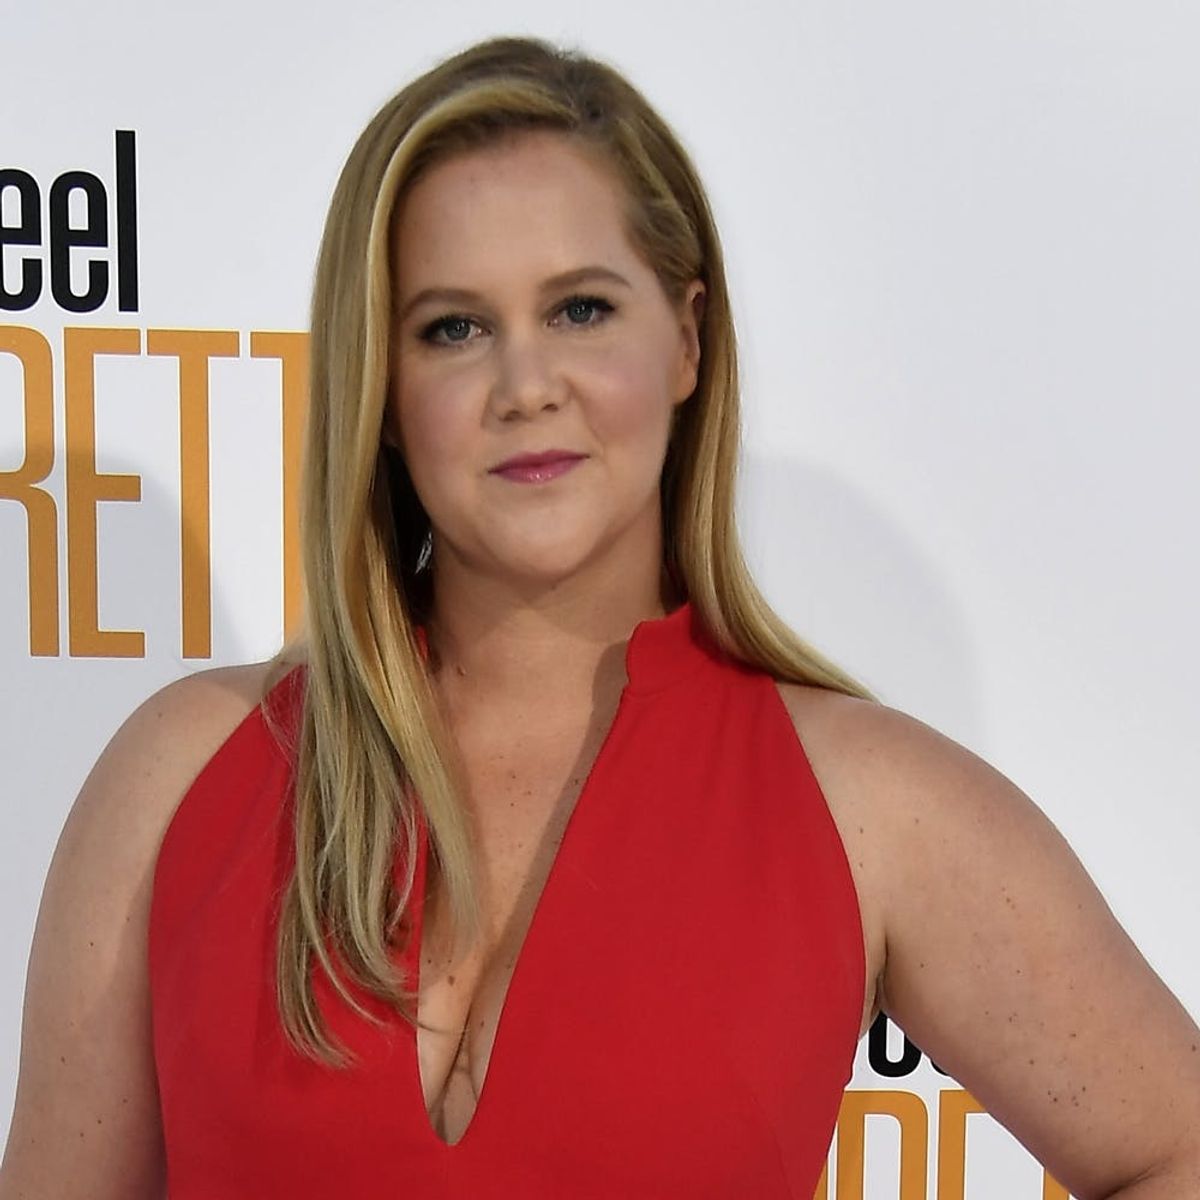 Amy Schumer Was Hospitalized for 5 Days With a Kidney Infection